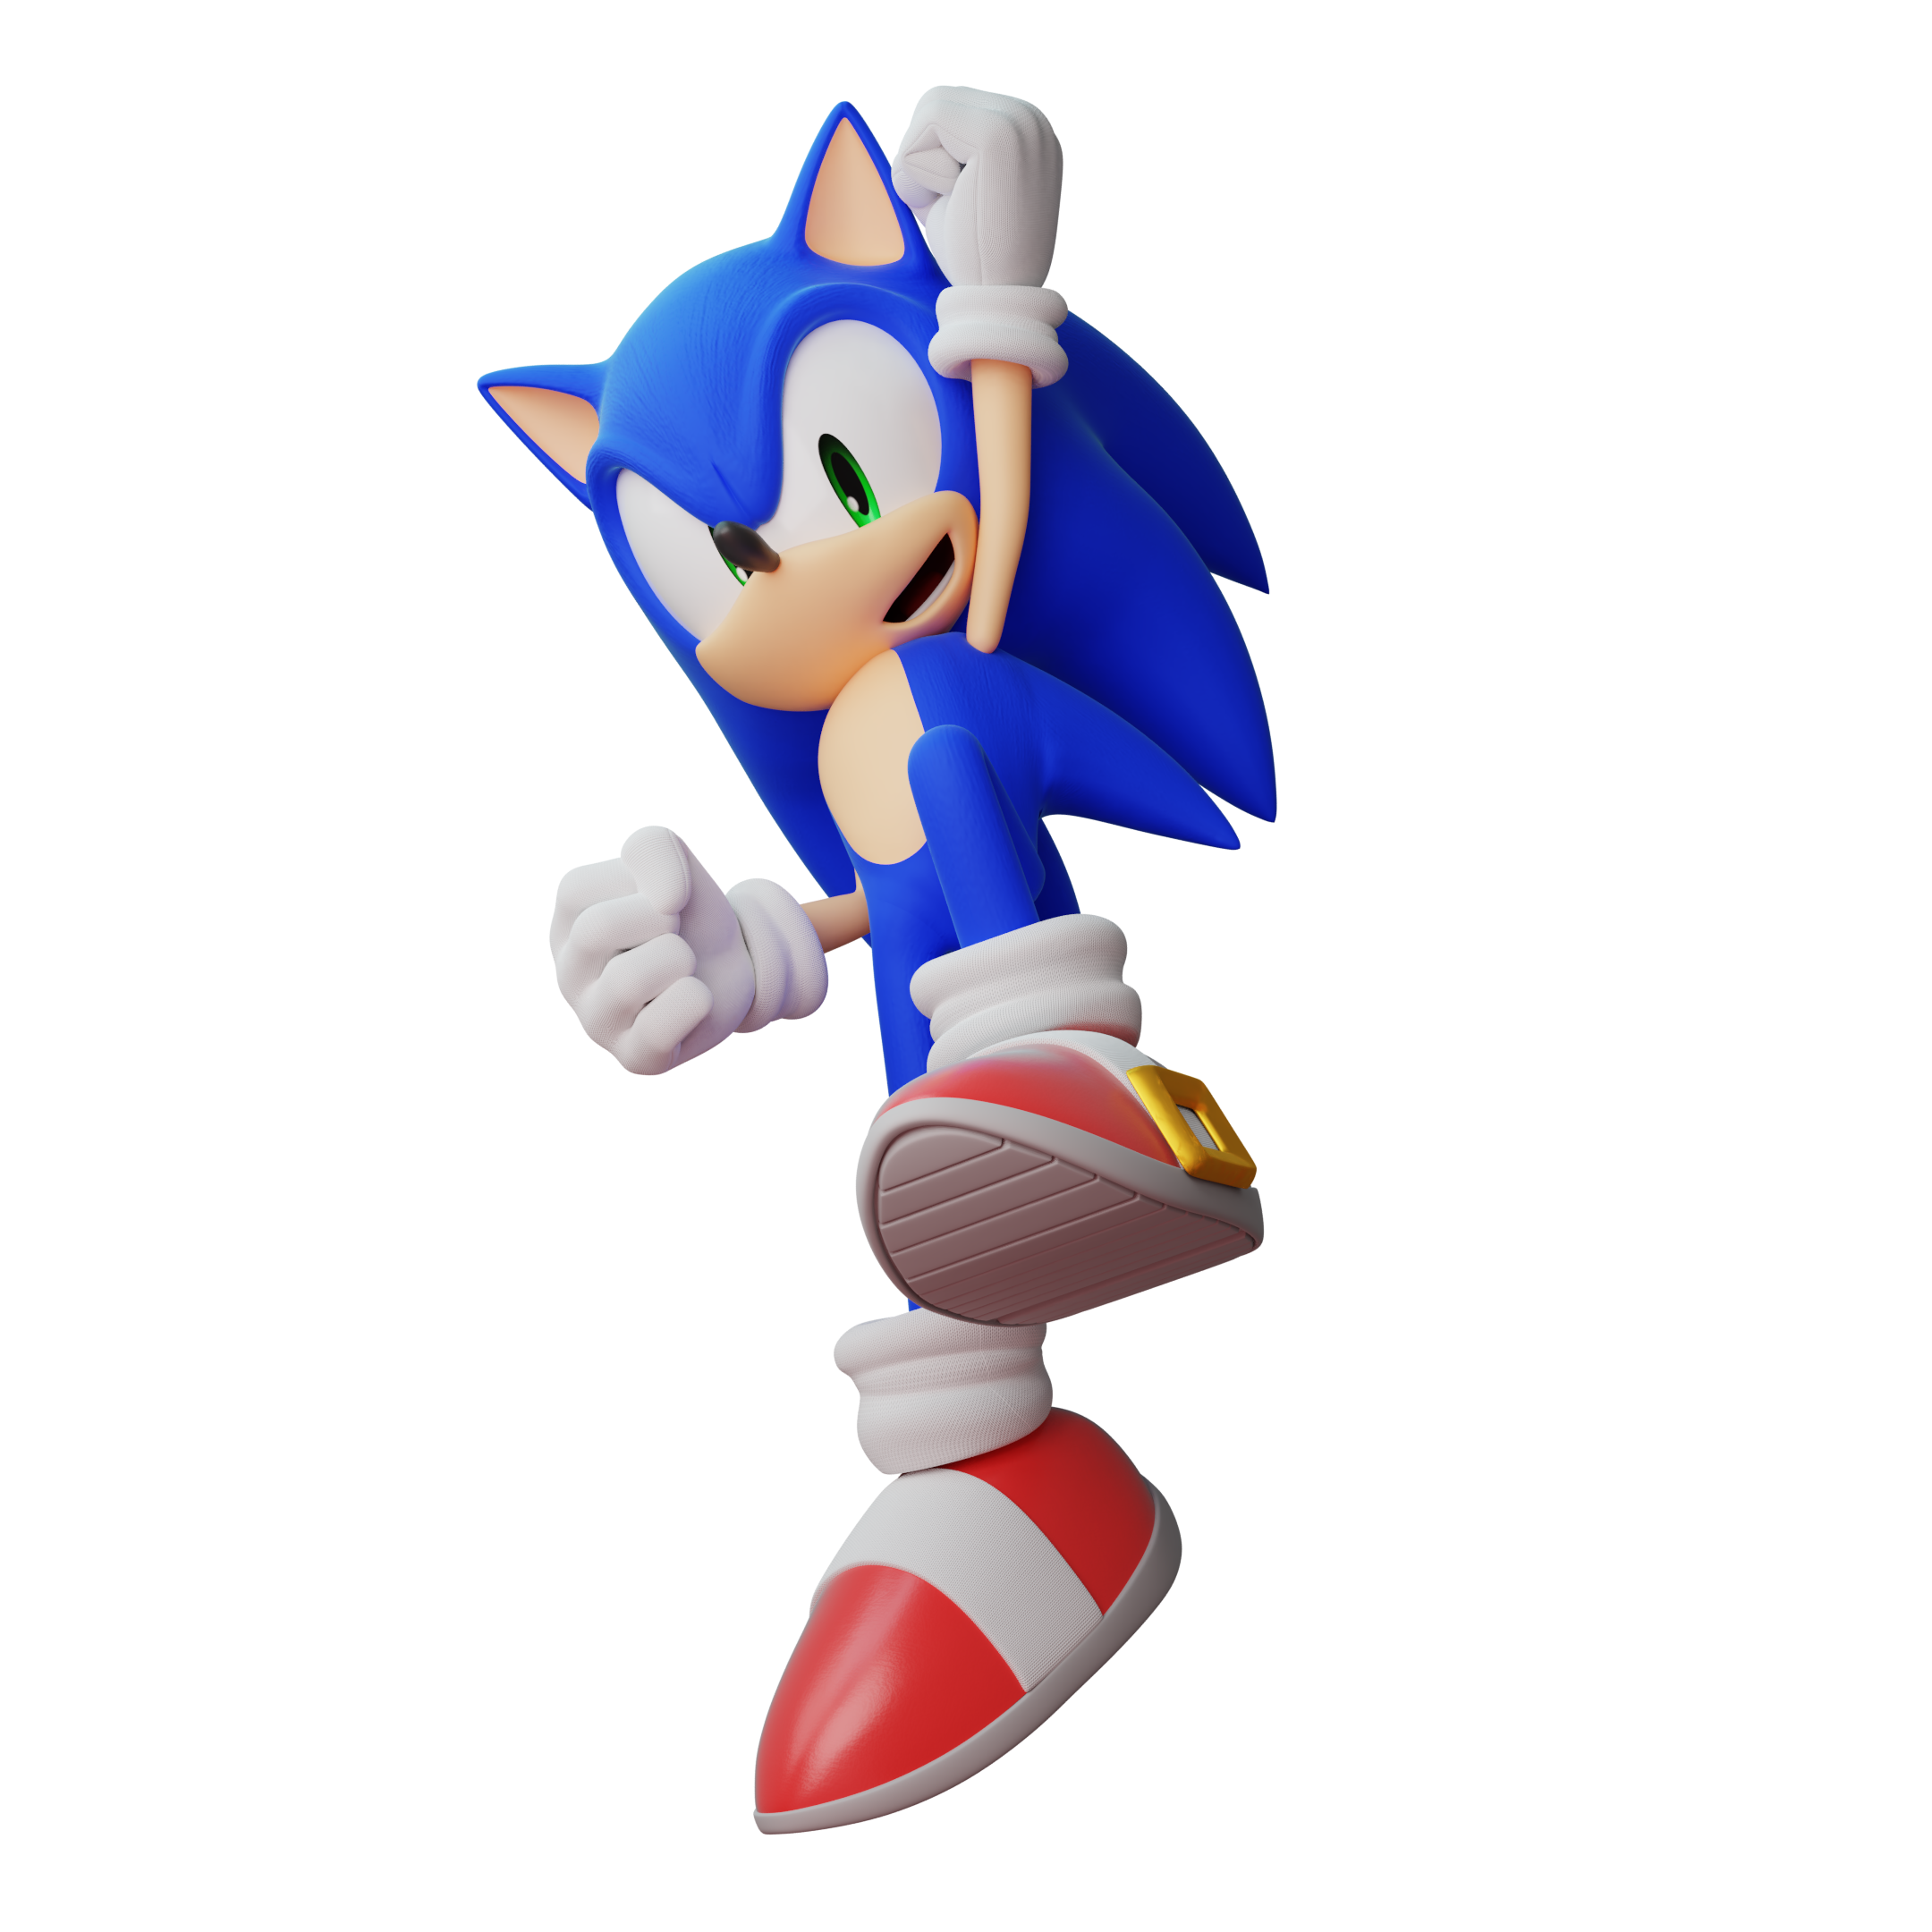 New Sonic 2 Movie Render (In Png) - Sonic! by snowf67 on DeviantArt